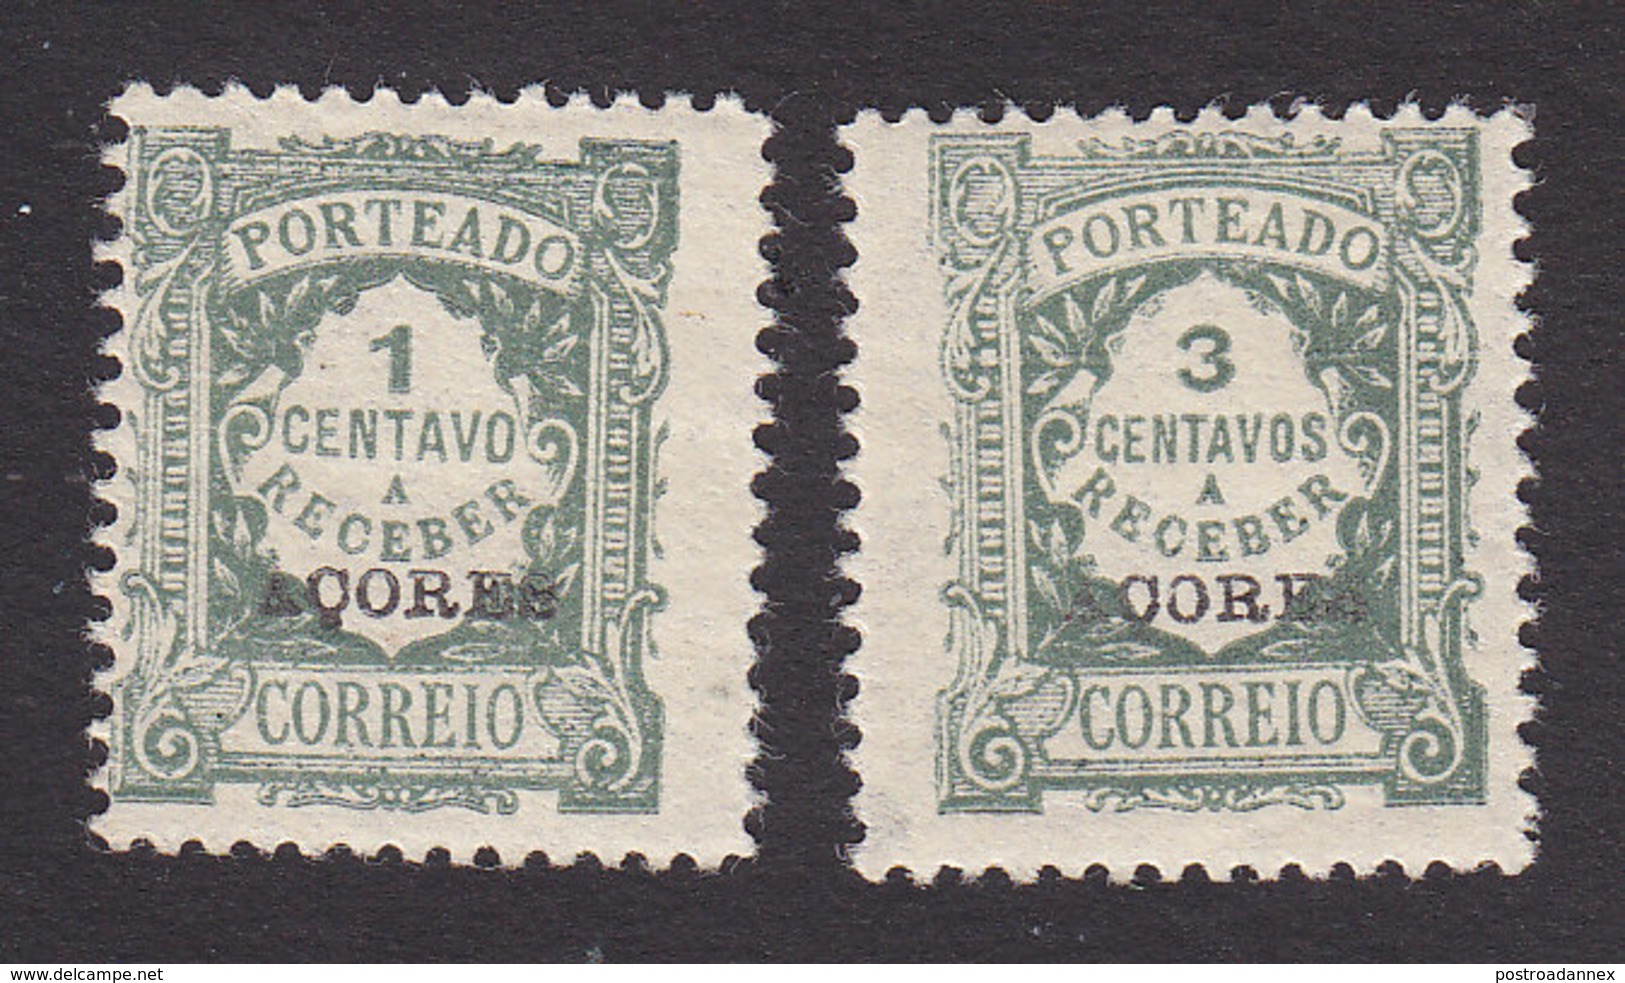 Azores, Scott #J31, J33, Mint Hinged, Postage Due Overprinted, Issued 1922 - Azores